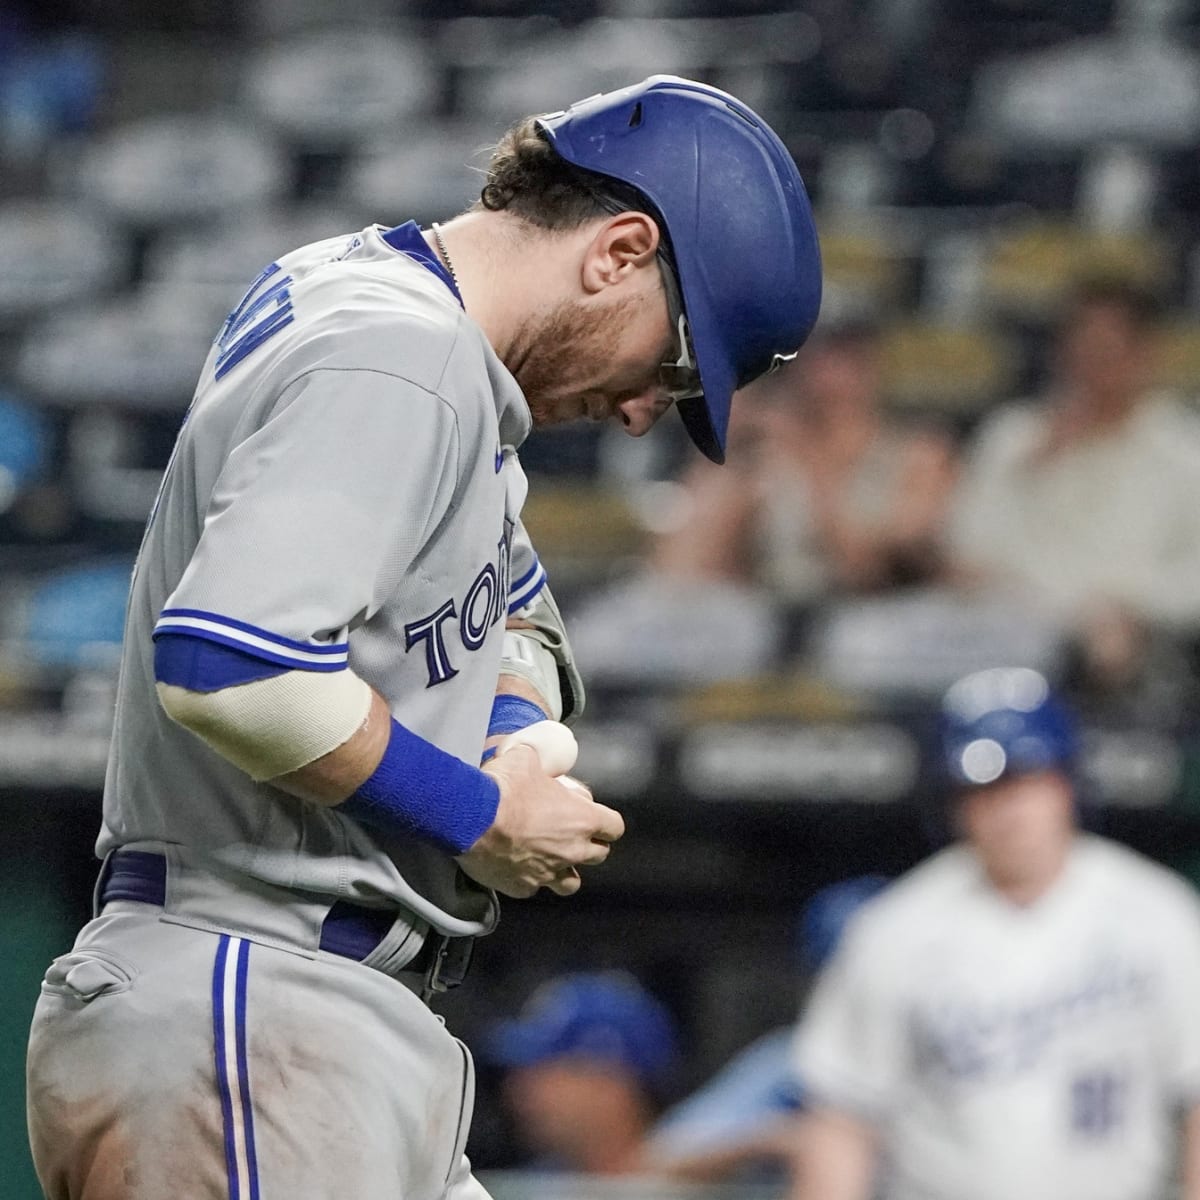 Danny Jansen Heading to IL With Finger Fracture, Blue Jays Recall